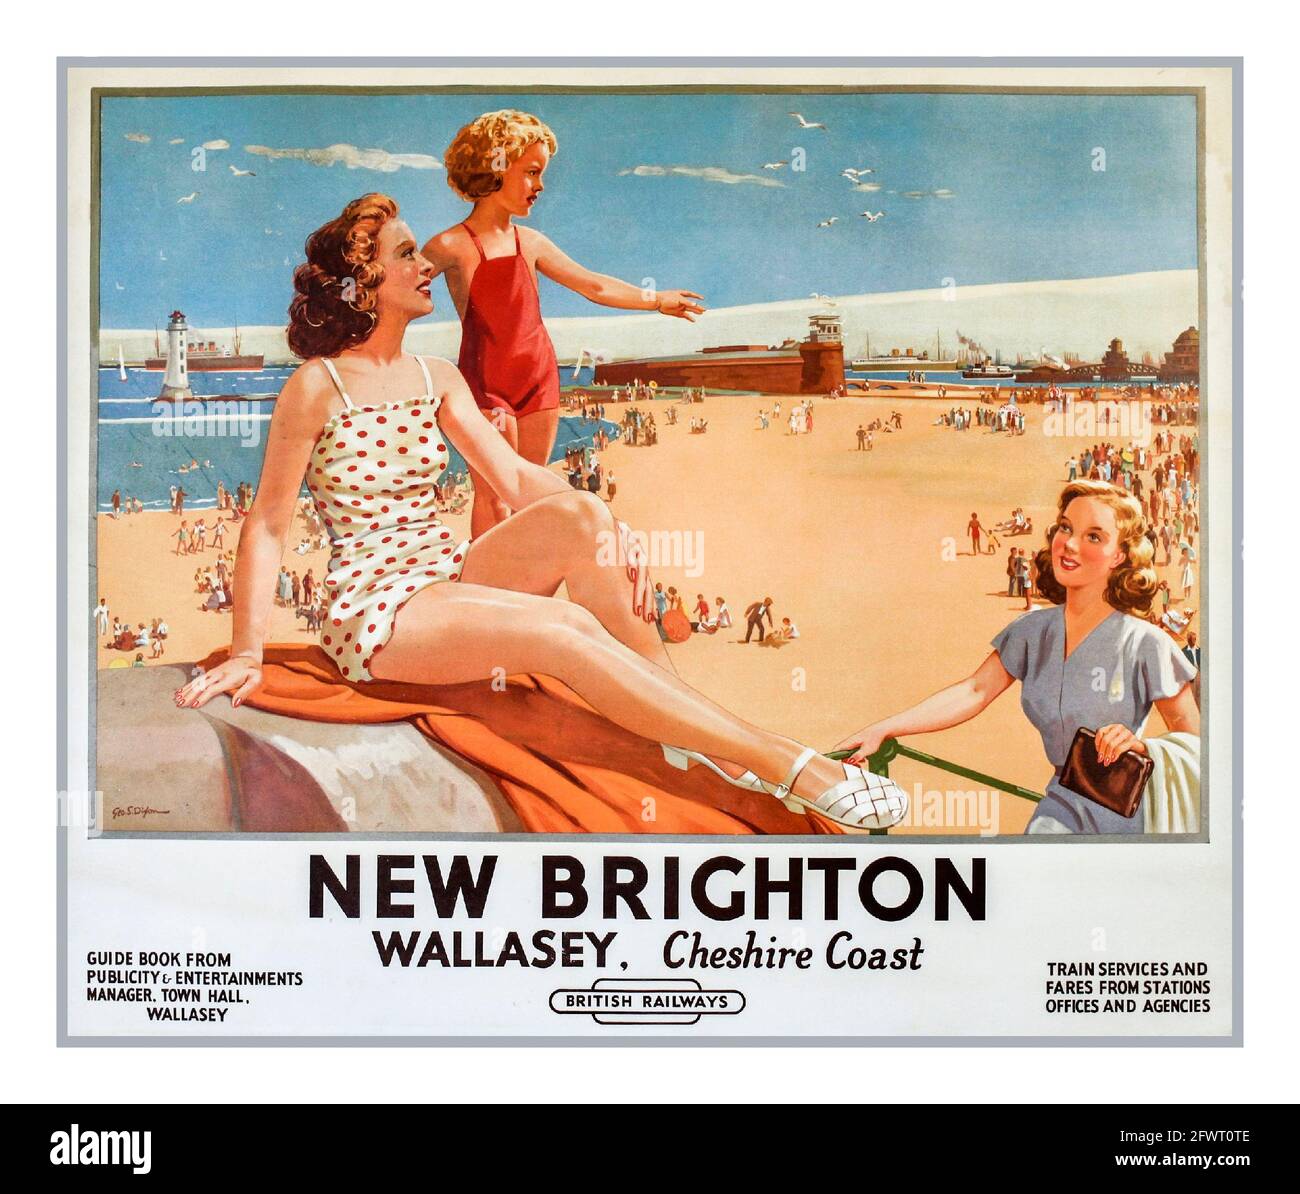 NEW BRIGHTON Vintage 1930's Travel Poster promoting holidays in the UK New Brighton Wallasey Cheshire Coast By British Railways Train Services UK Stock Photo